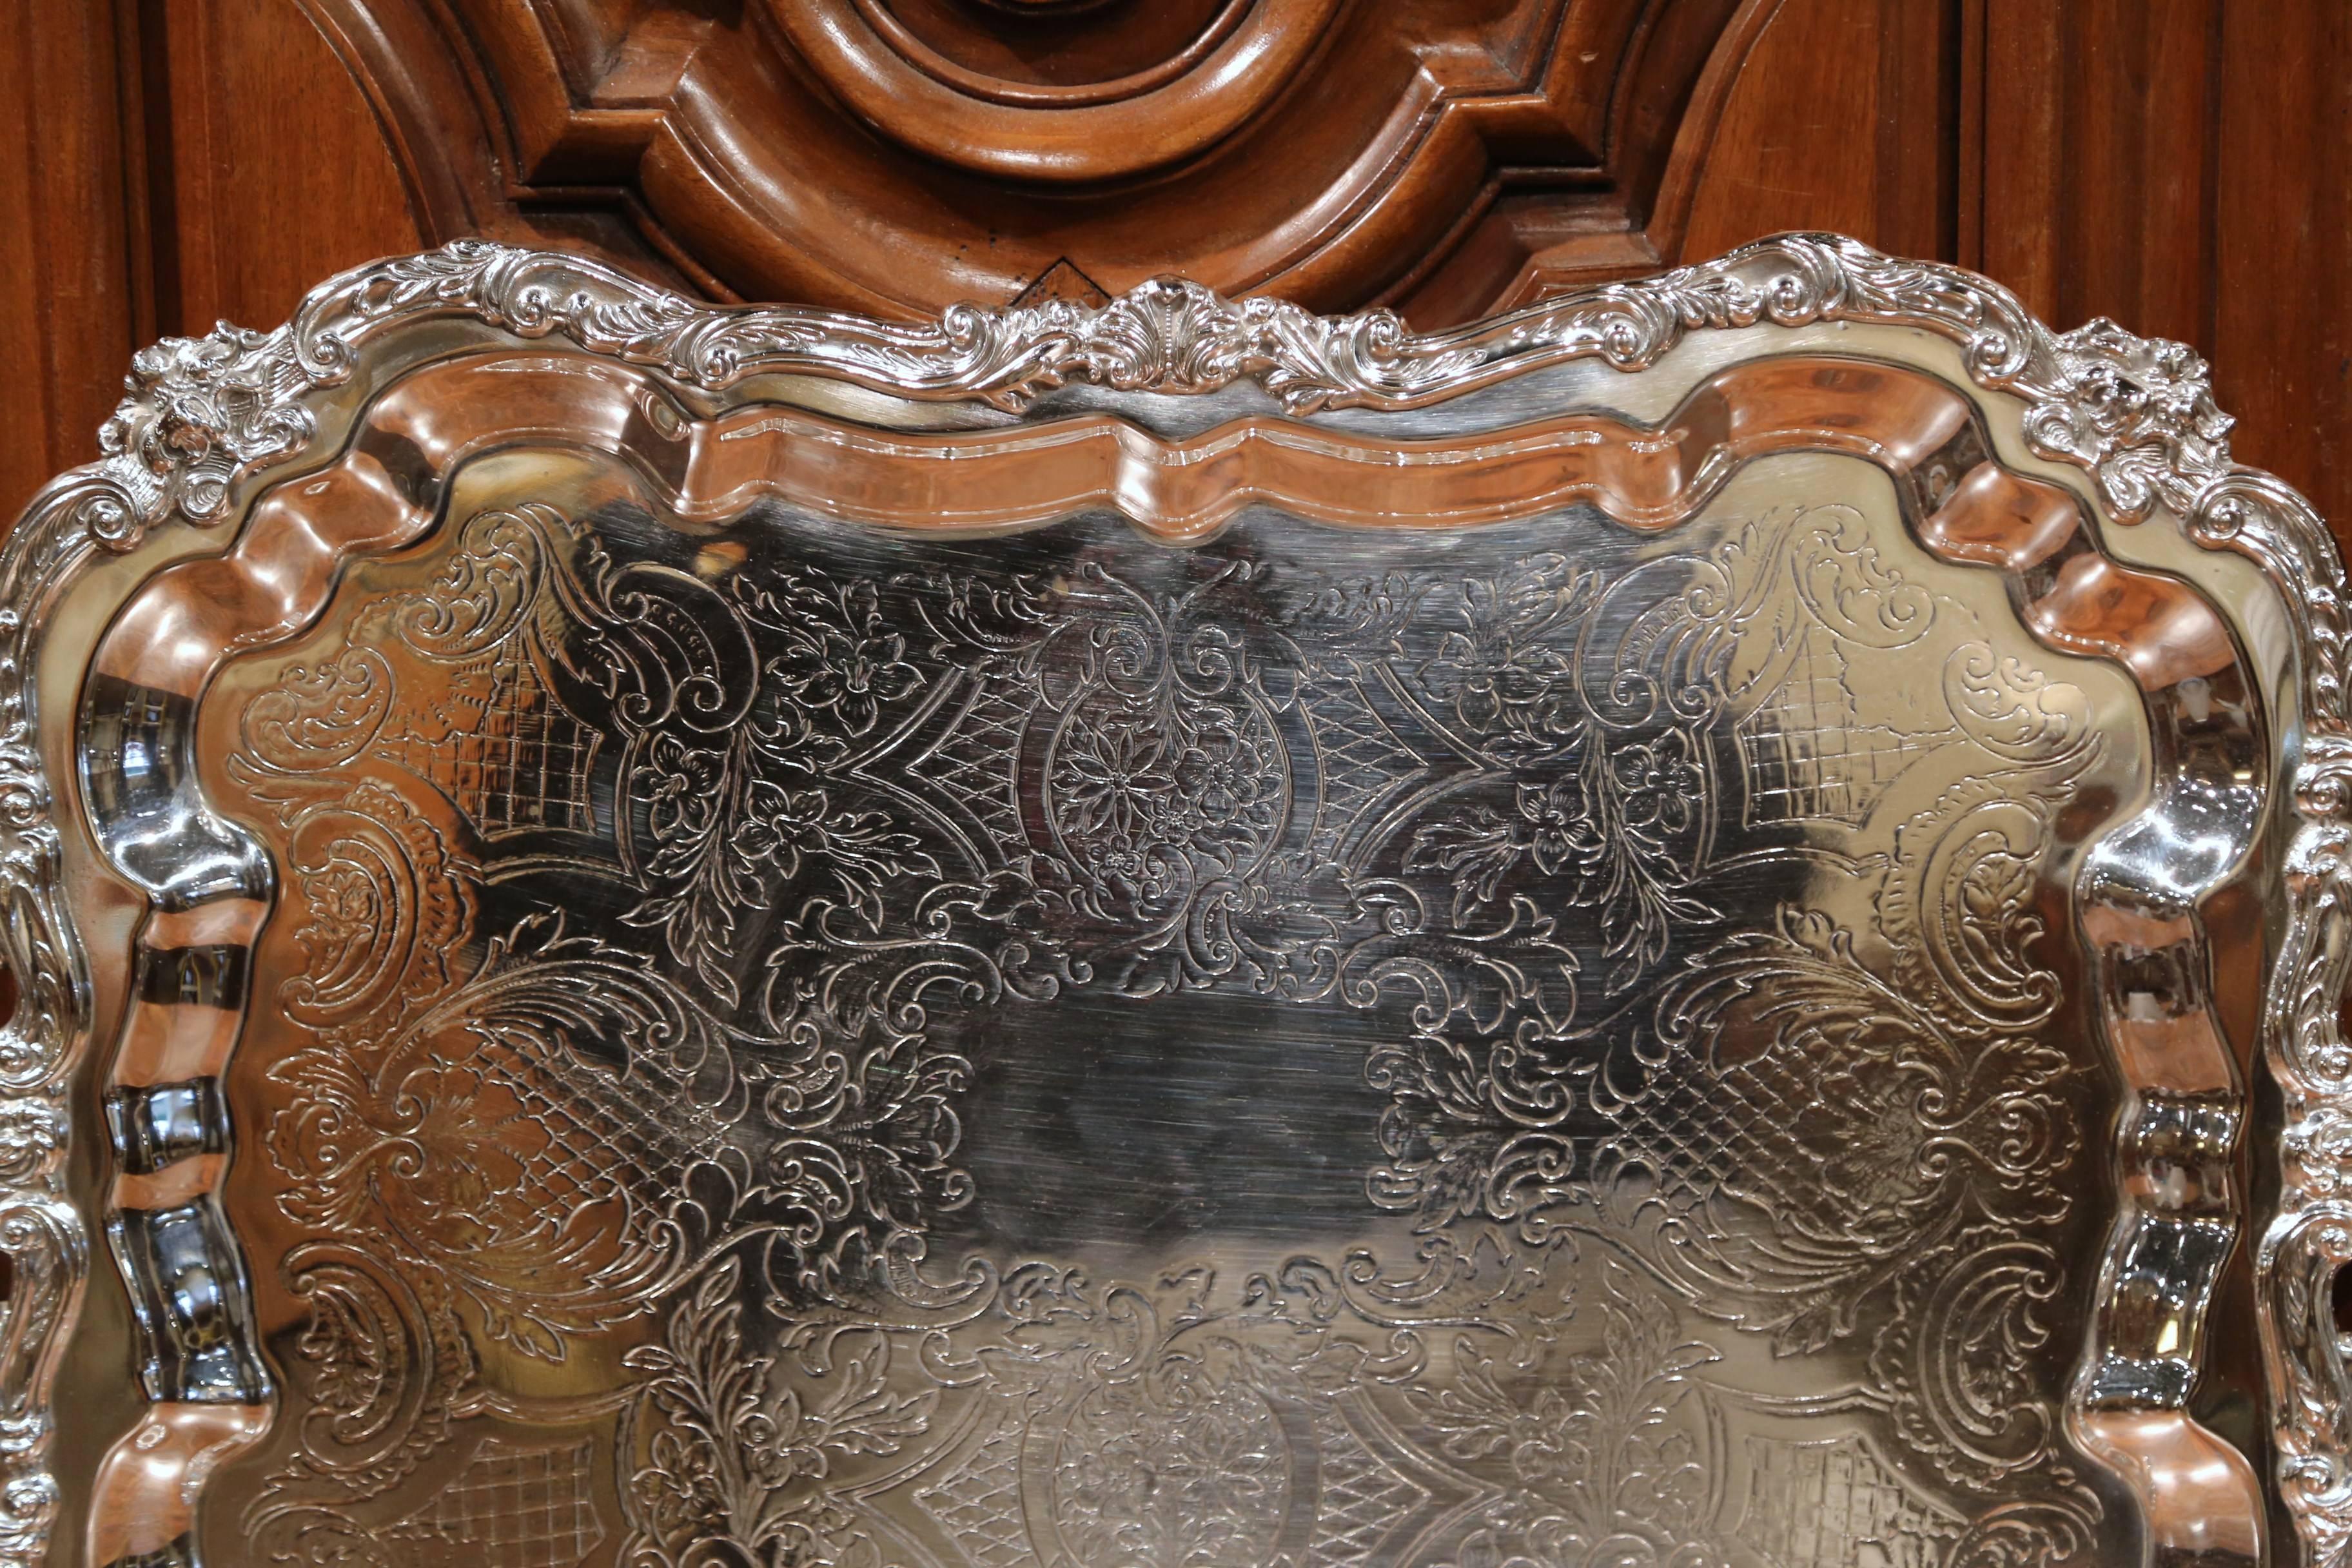 Hand-Crafted Early 20th Century French Silver Plated Tray with Ornate Scrolls and Engravings